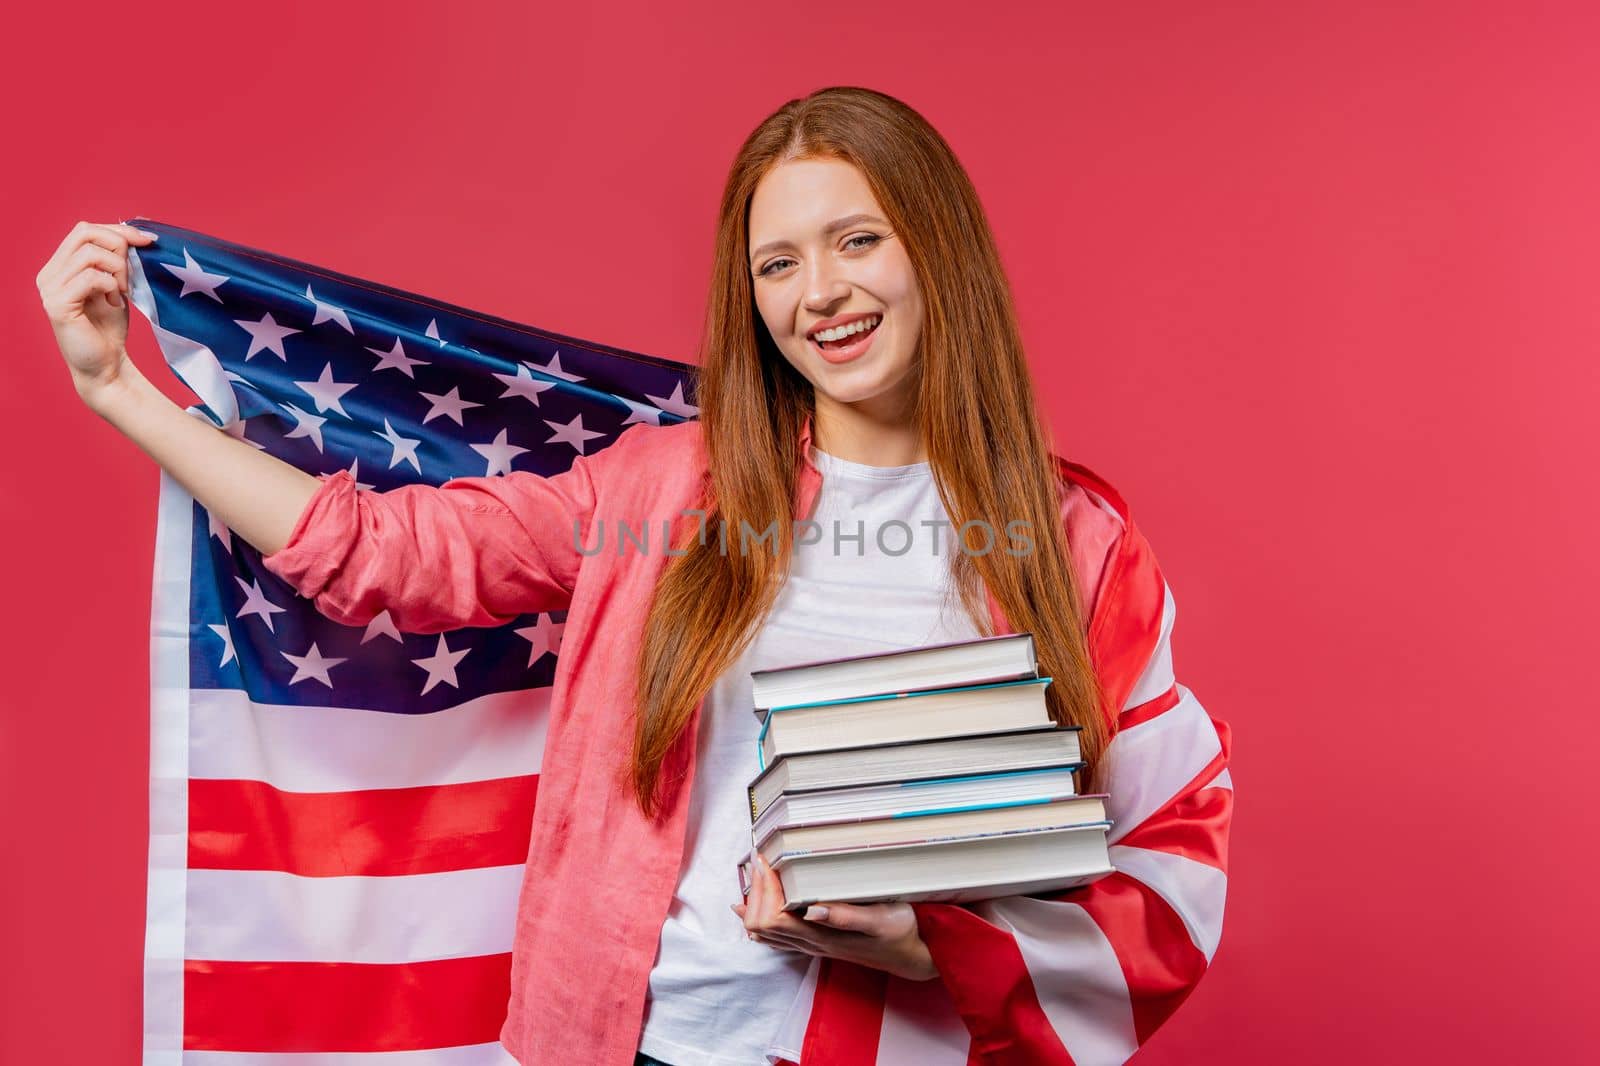 American woman student holds stack of university books from college library on pink background. Happy girl smiles, she is happy to graduate in USA, education abroad concept. High quality photo